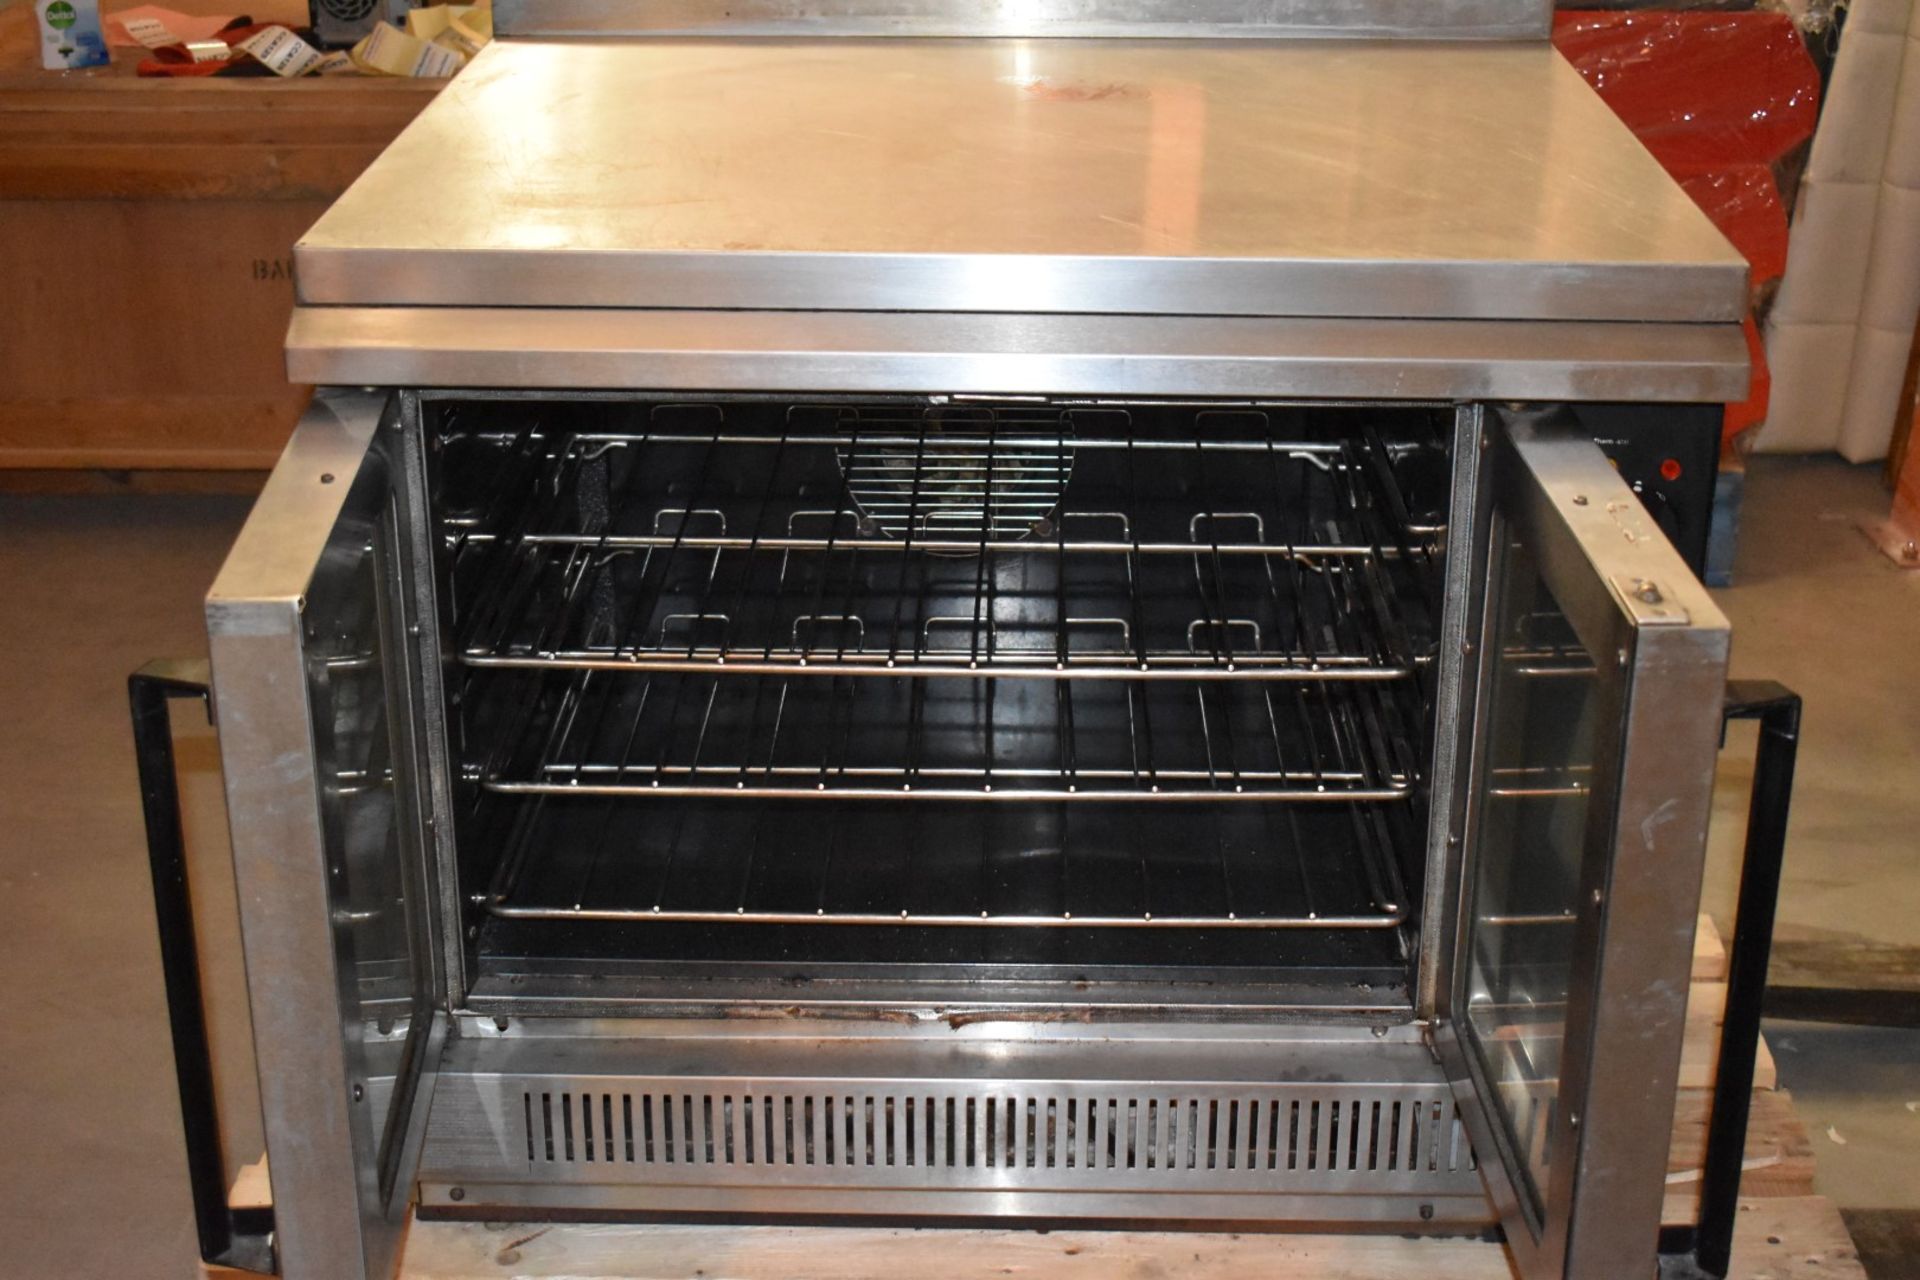 1 x Falcon G1112 Convection Oven - Dimensions: H75 x W90 x D78 cms - 230v / Natural Gas - Image 9 of 10